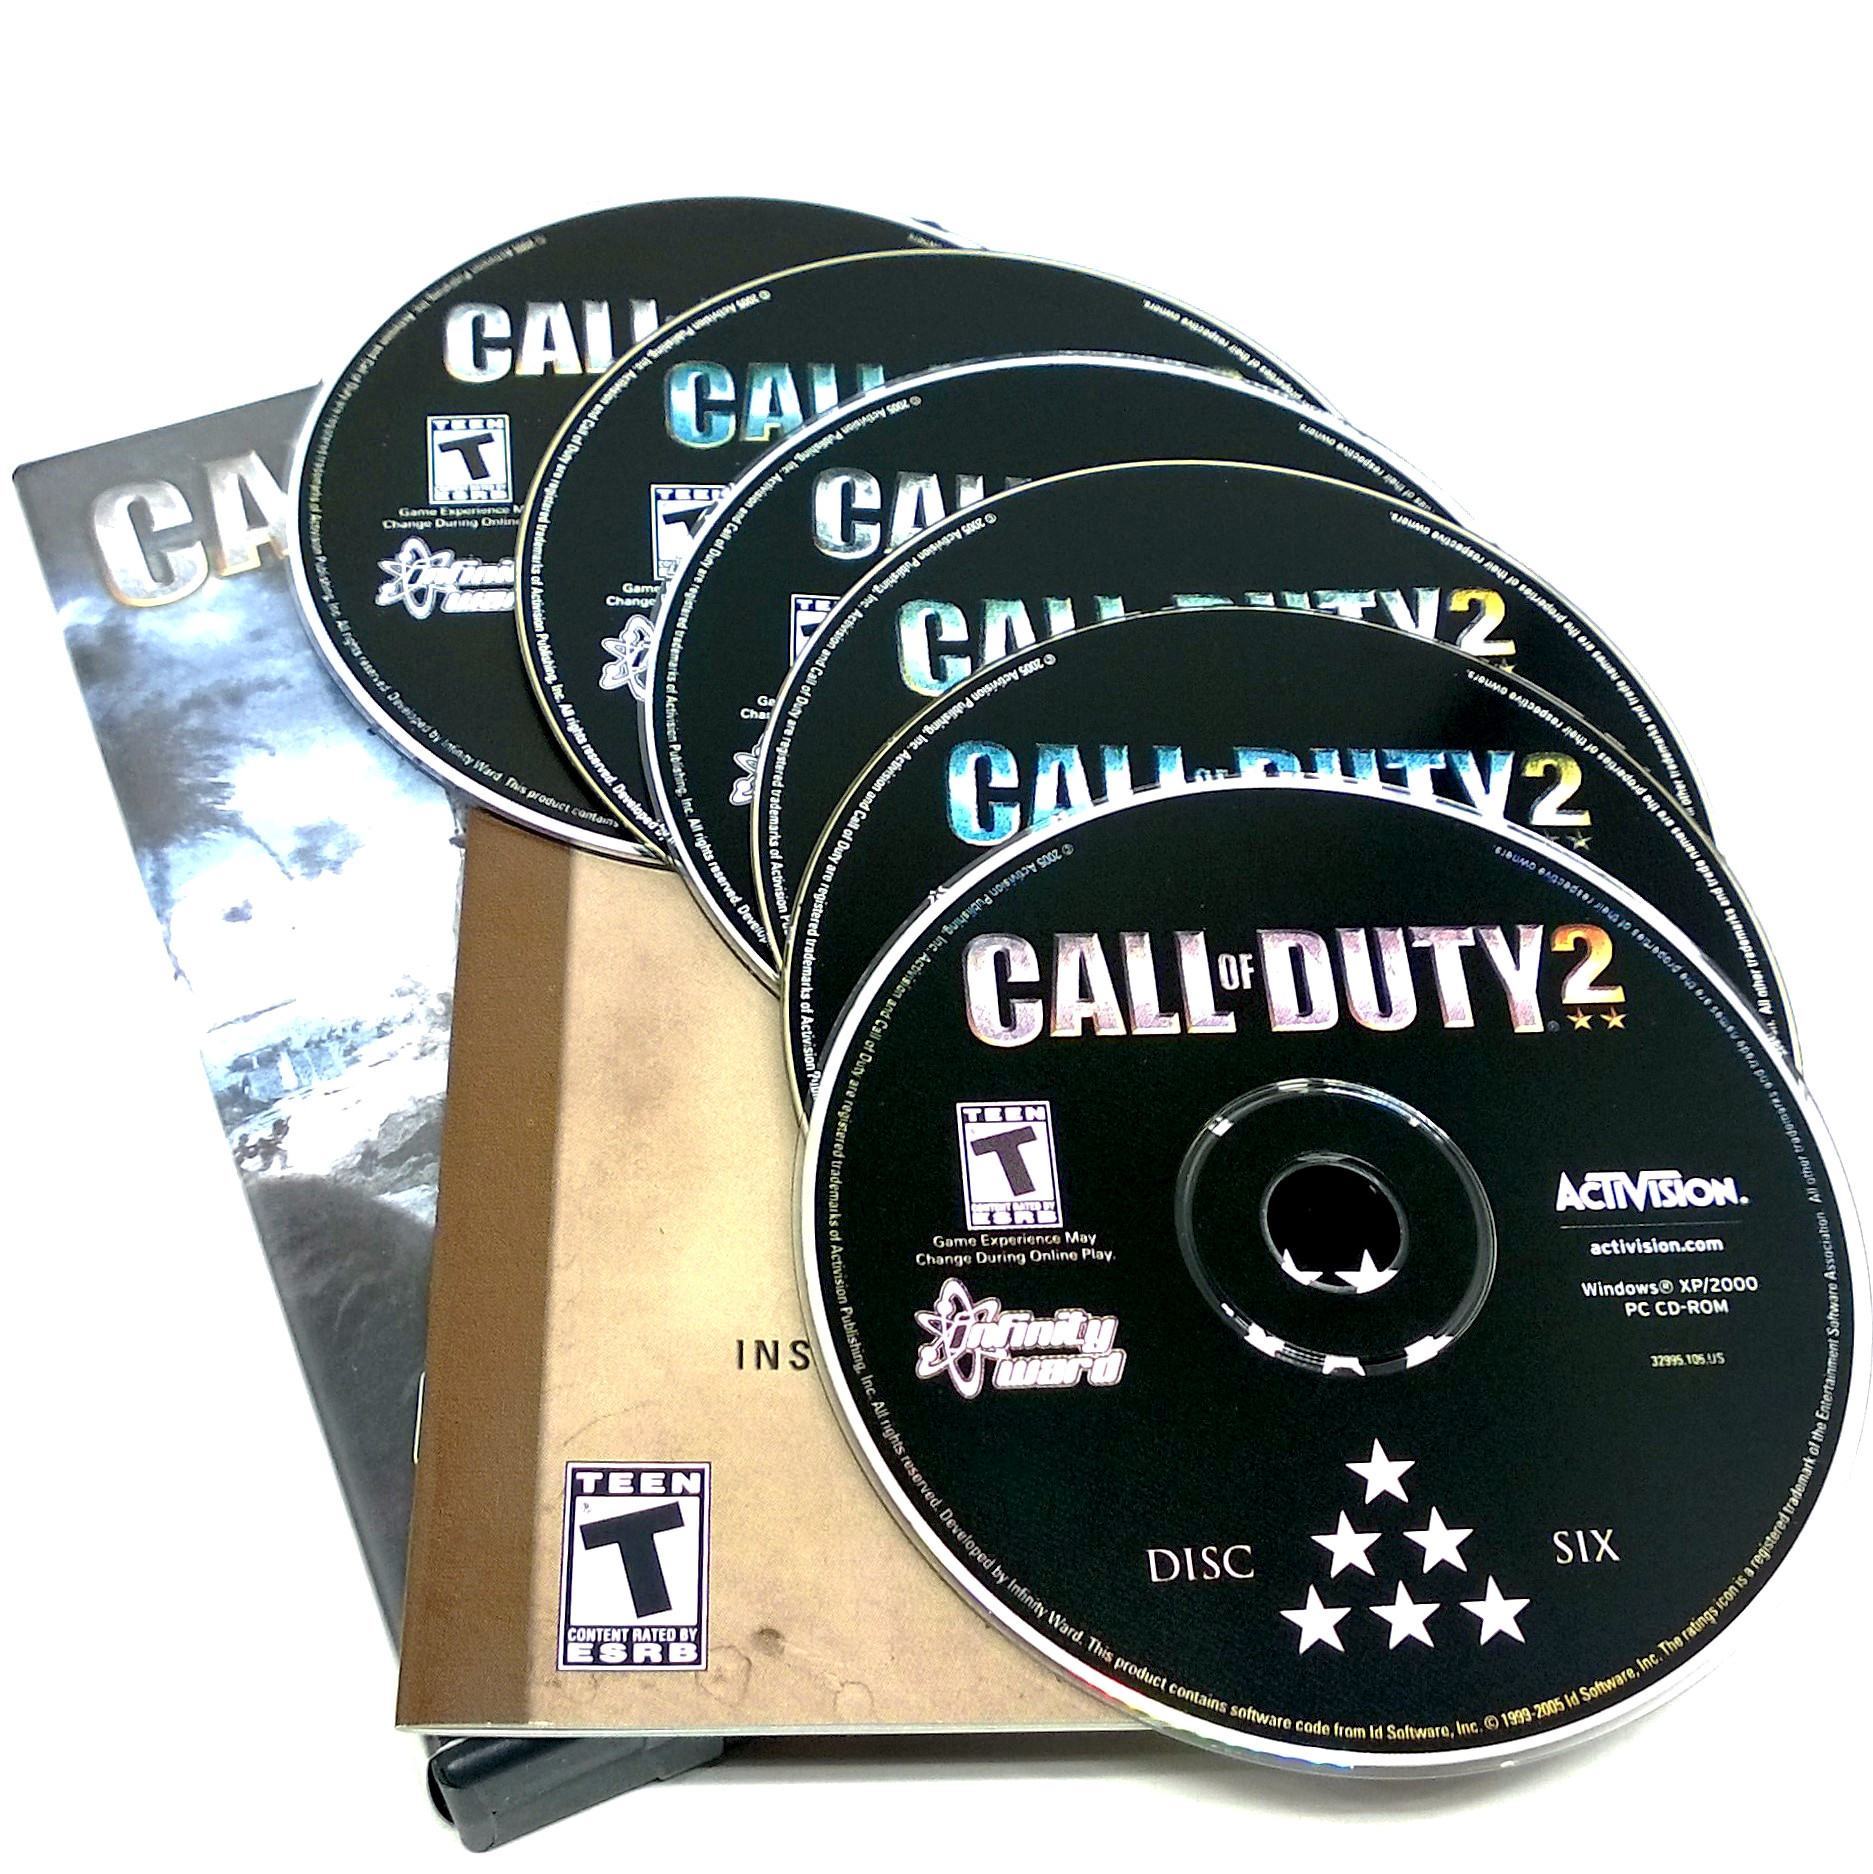 Call of Duty 2 for PC CD-ROM